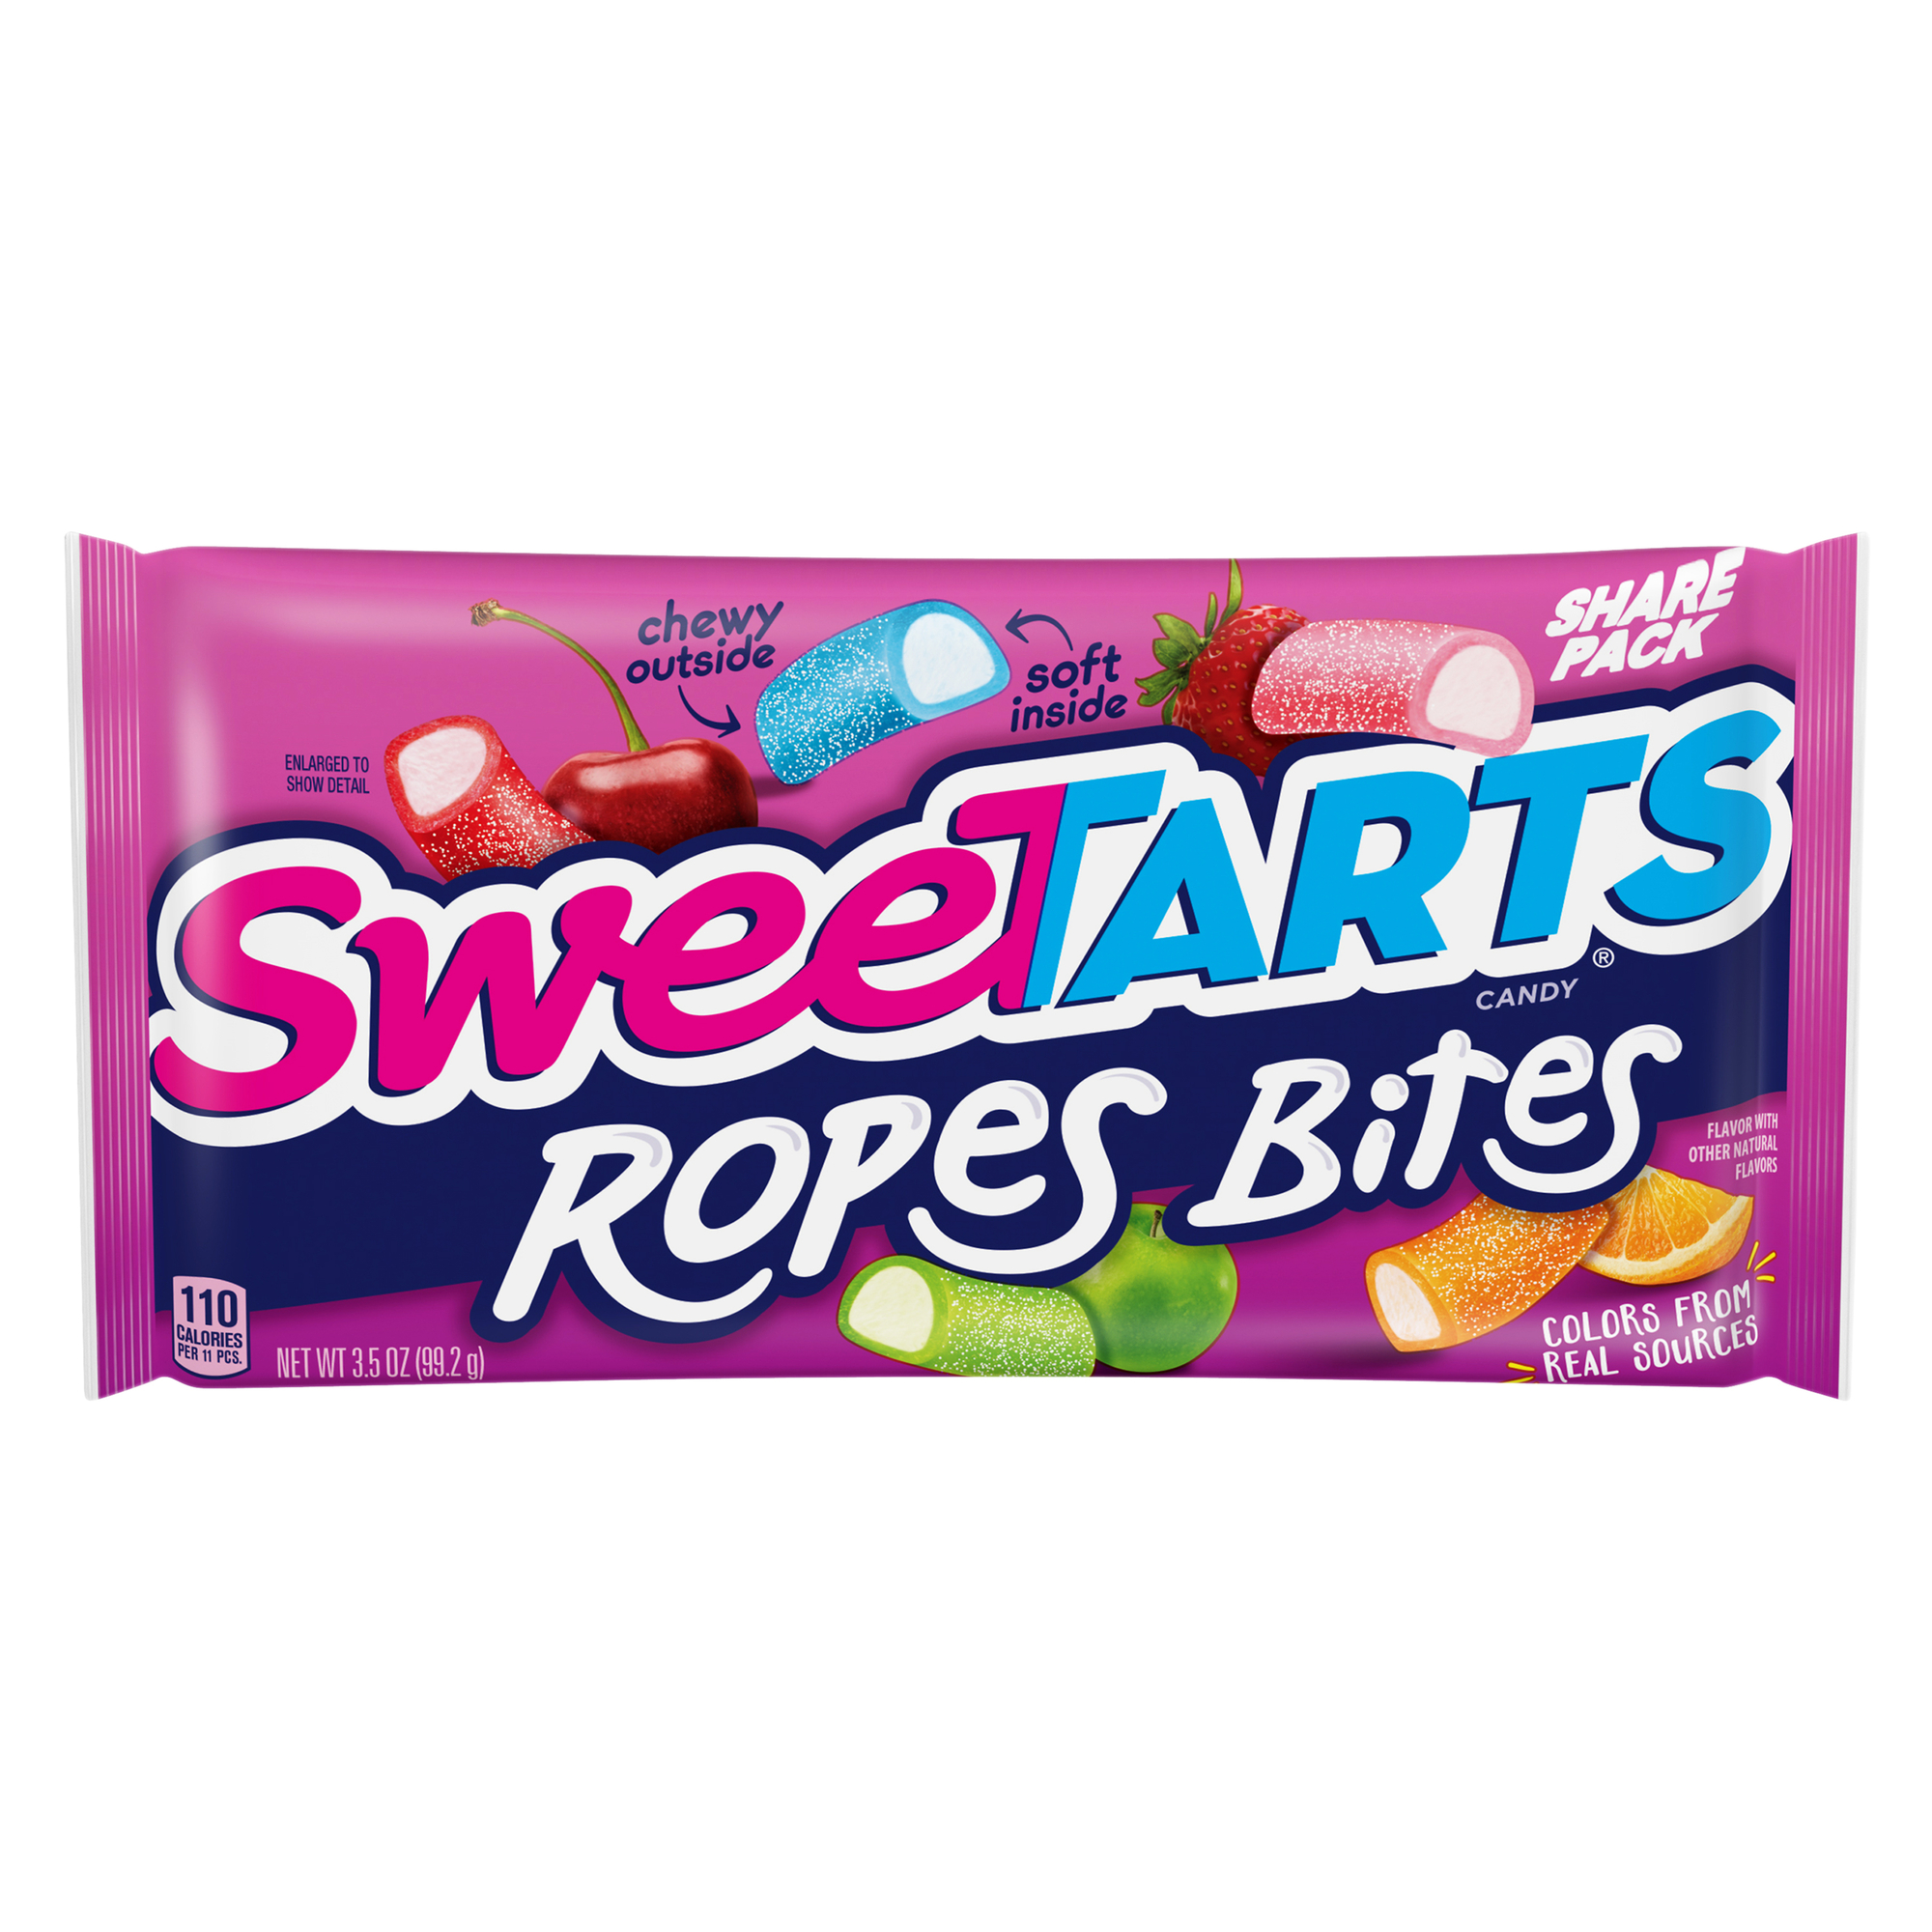 sweetarts® soft & chewy ropes bites candy share pack 3.5oz